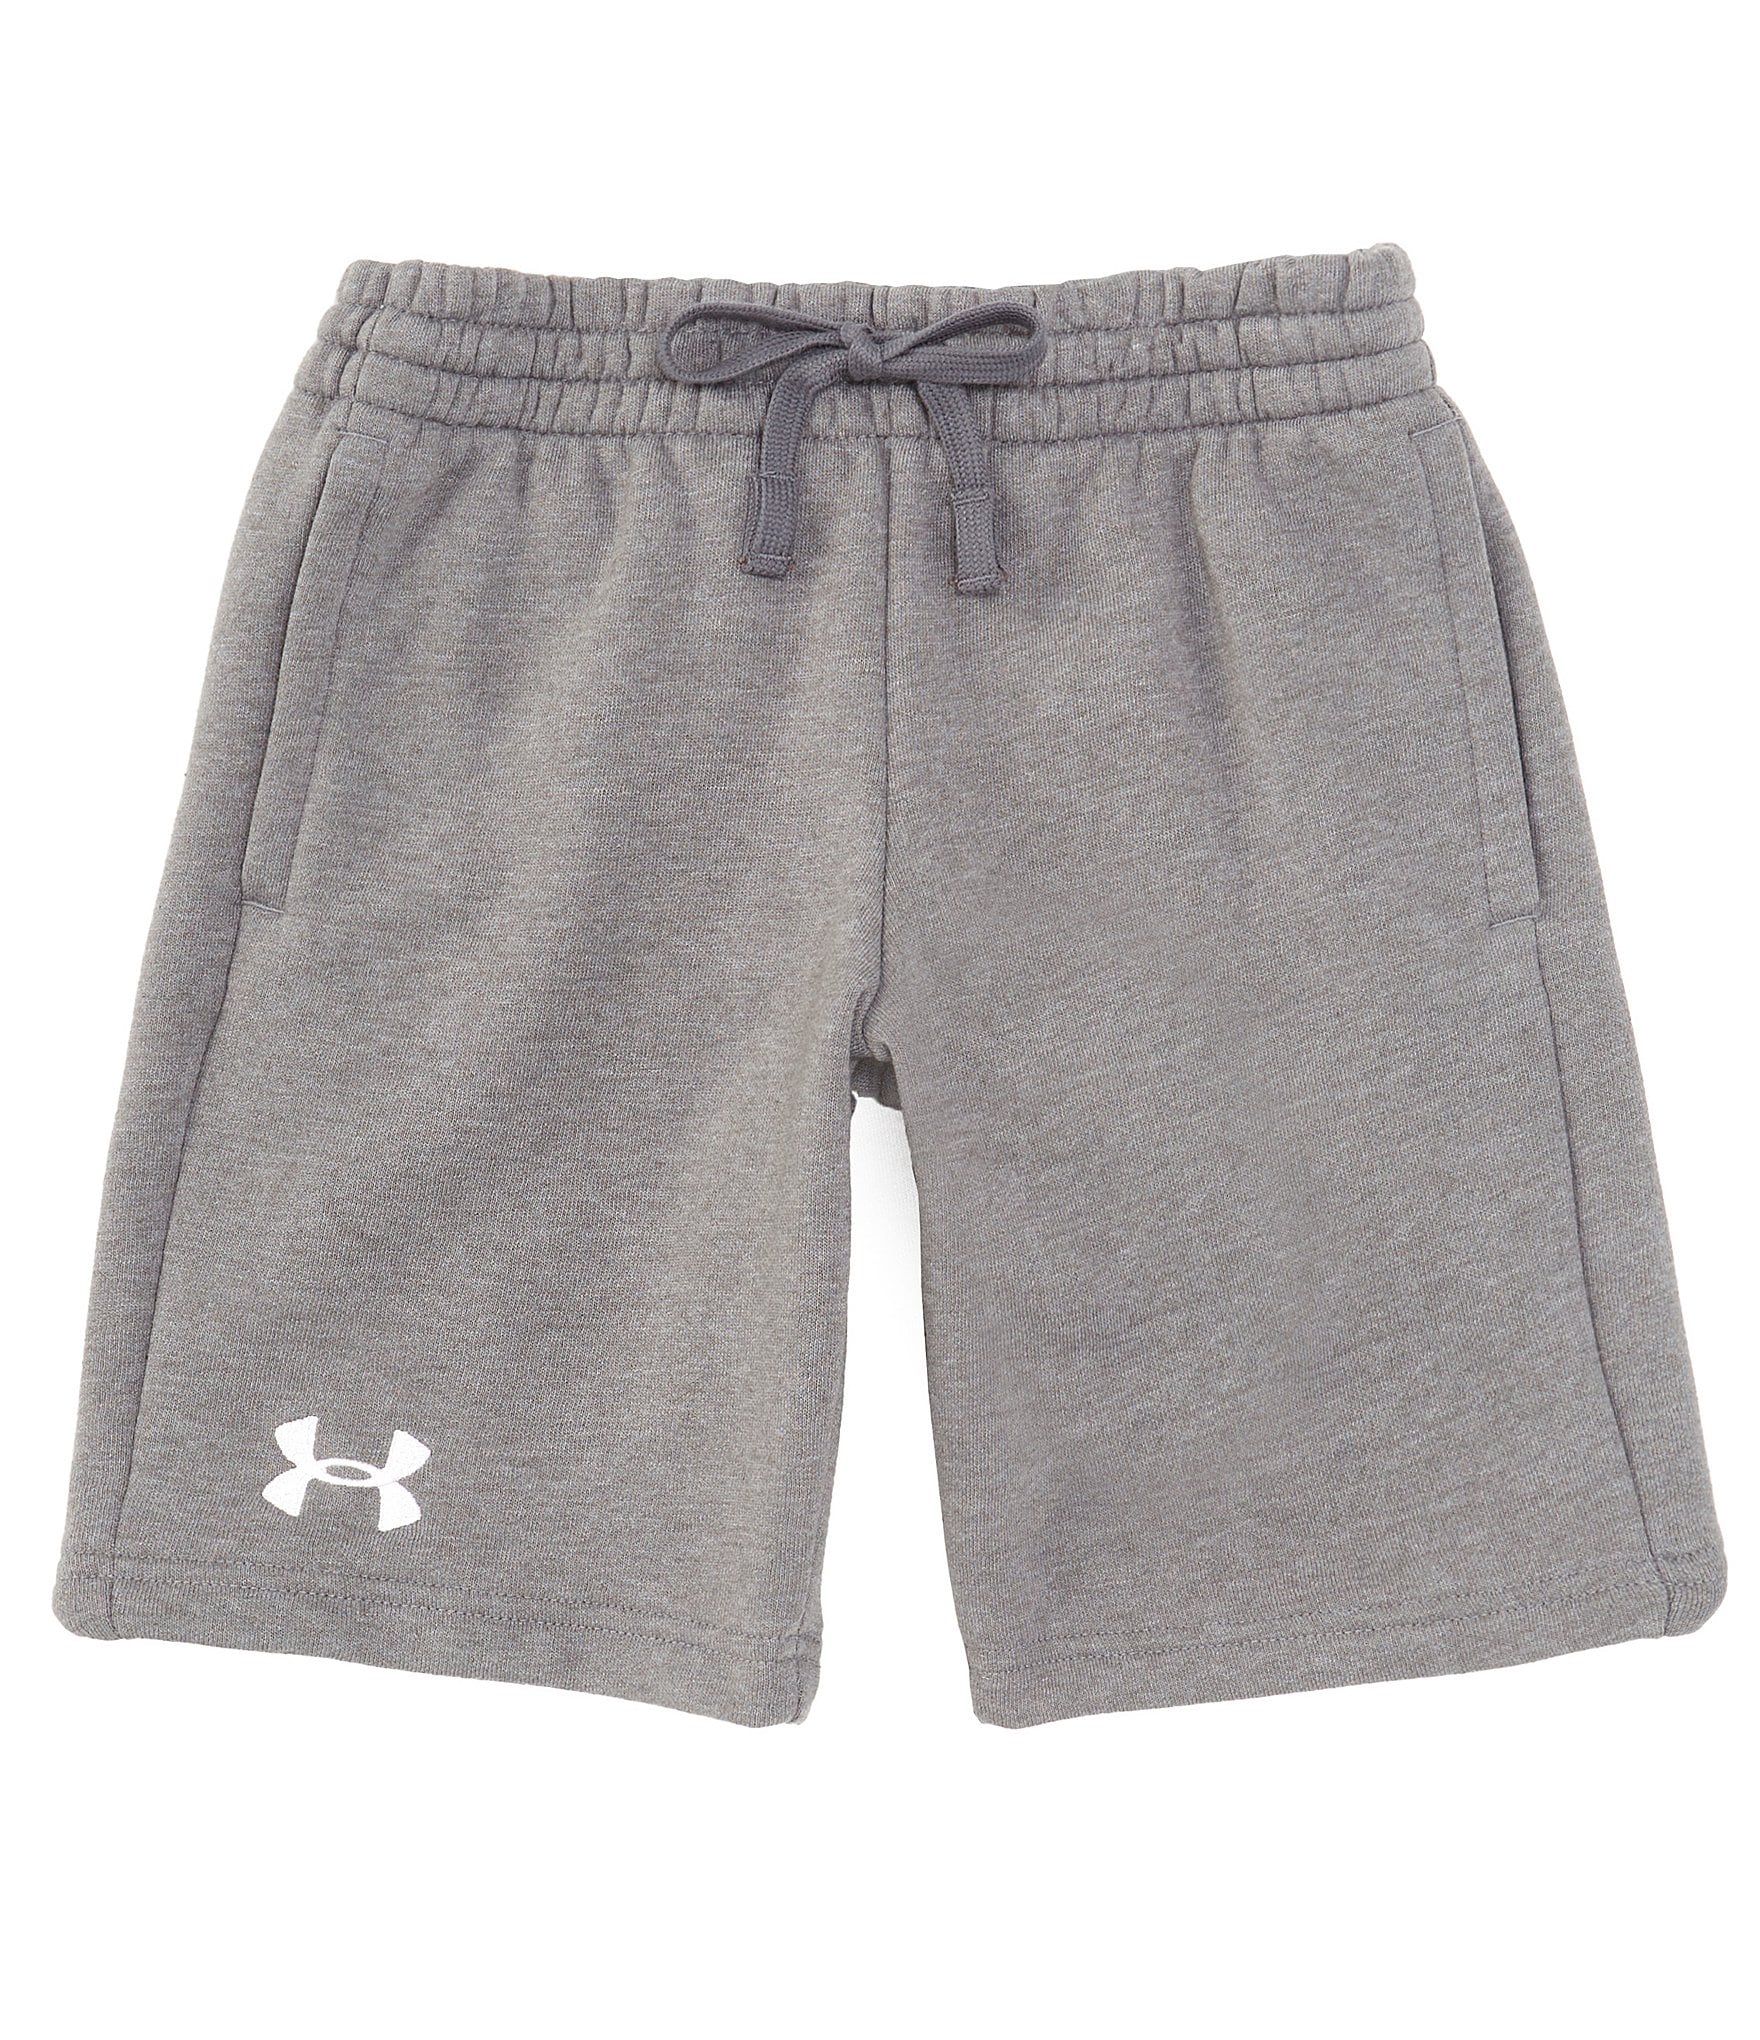 Mens Under Armour Shorts Price In India